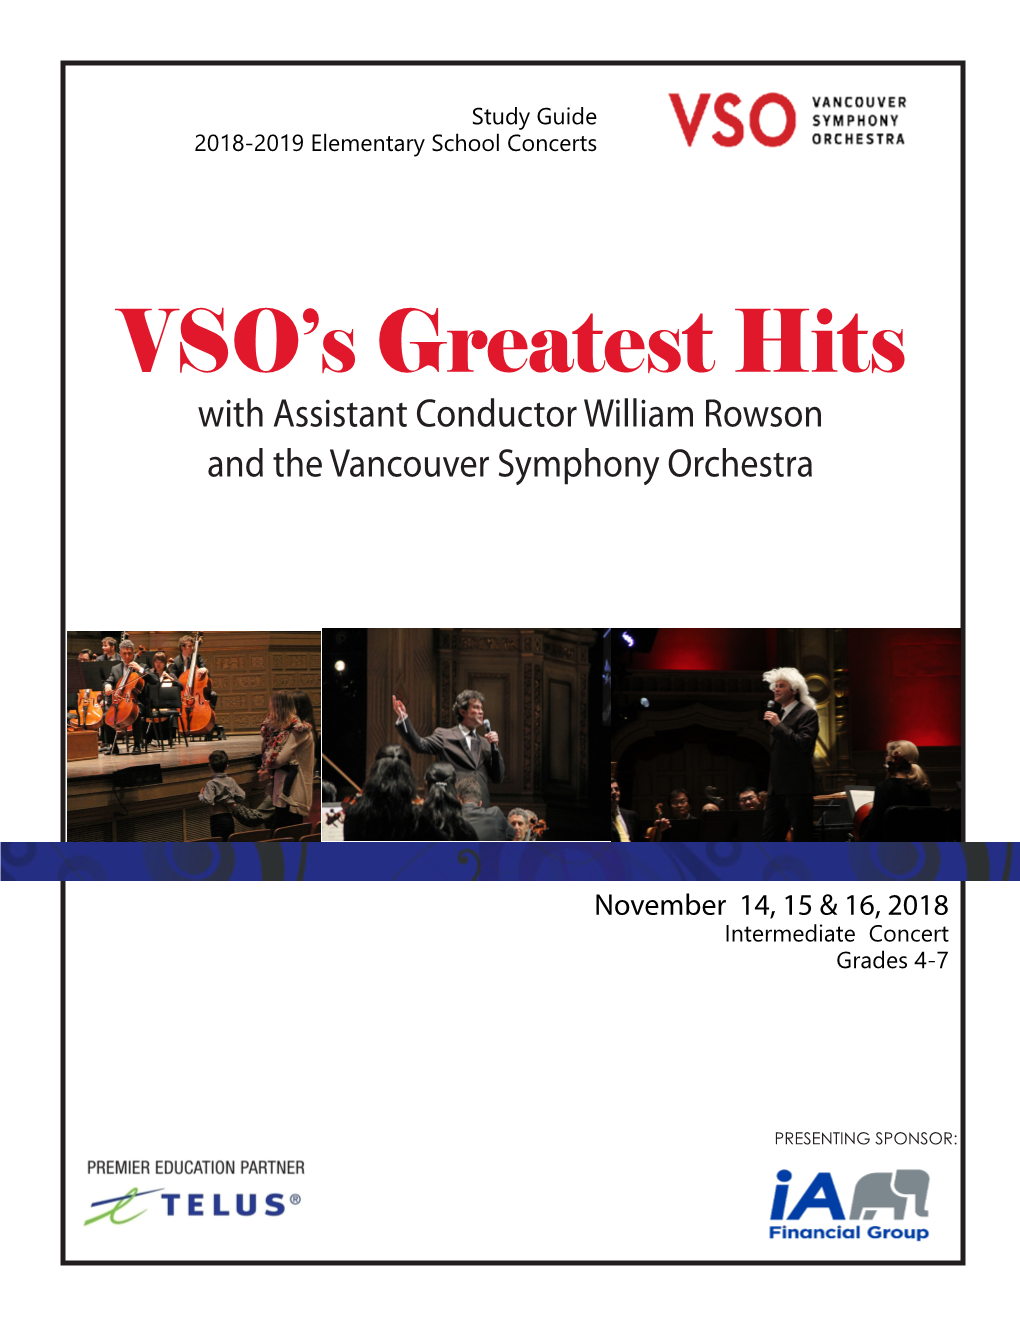 VSO's Greatest Hits